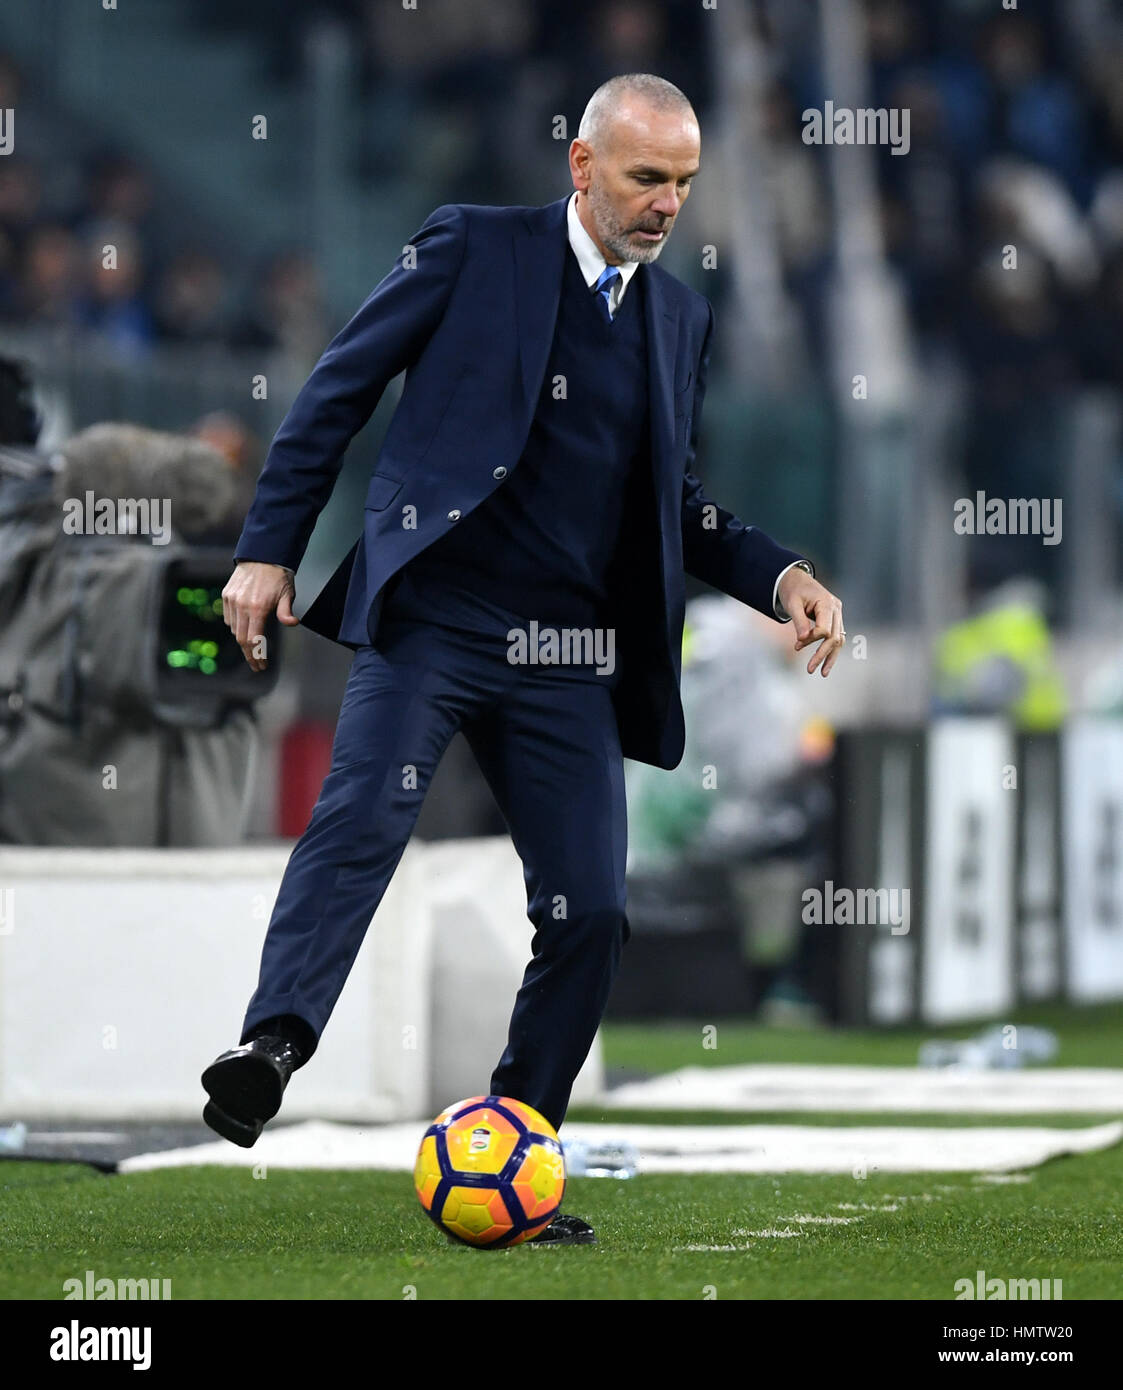 Turin, Italy. 5th Feb, 2017. Inter Milan's coach Stefano Pioli kicks the ball during the Serie A soccer match against Juventus in Turin, Italy. Juventus won 1-0. Credit: Alberto Lingria/Xinhua/Alamy Live News Stock Photo